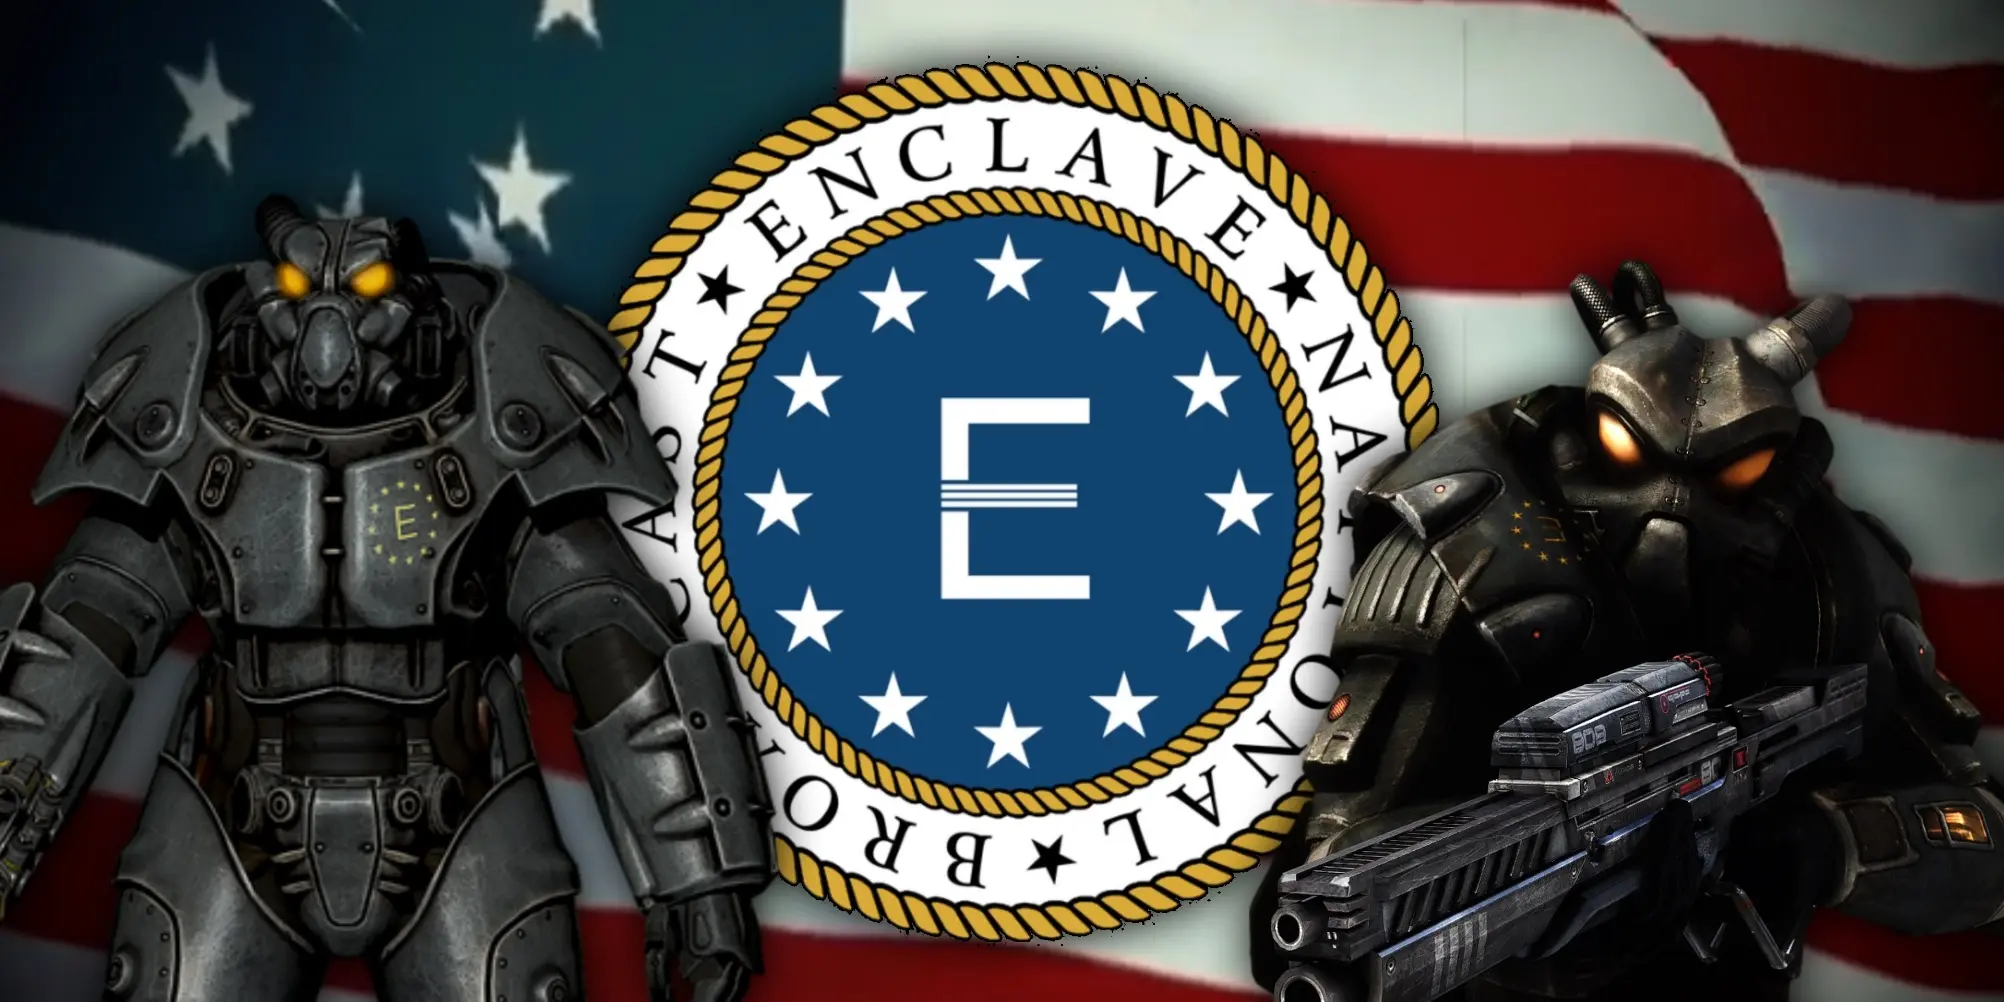 Enclave National Broadcast At Fallout 4 Nexus Mods And Community 6311